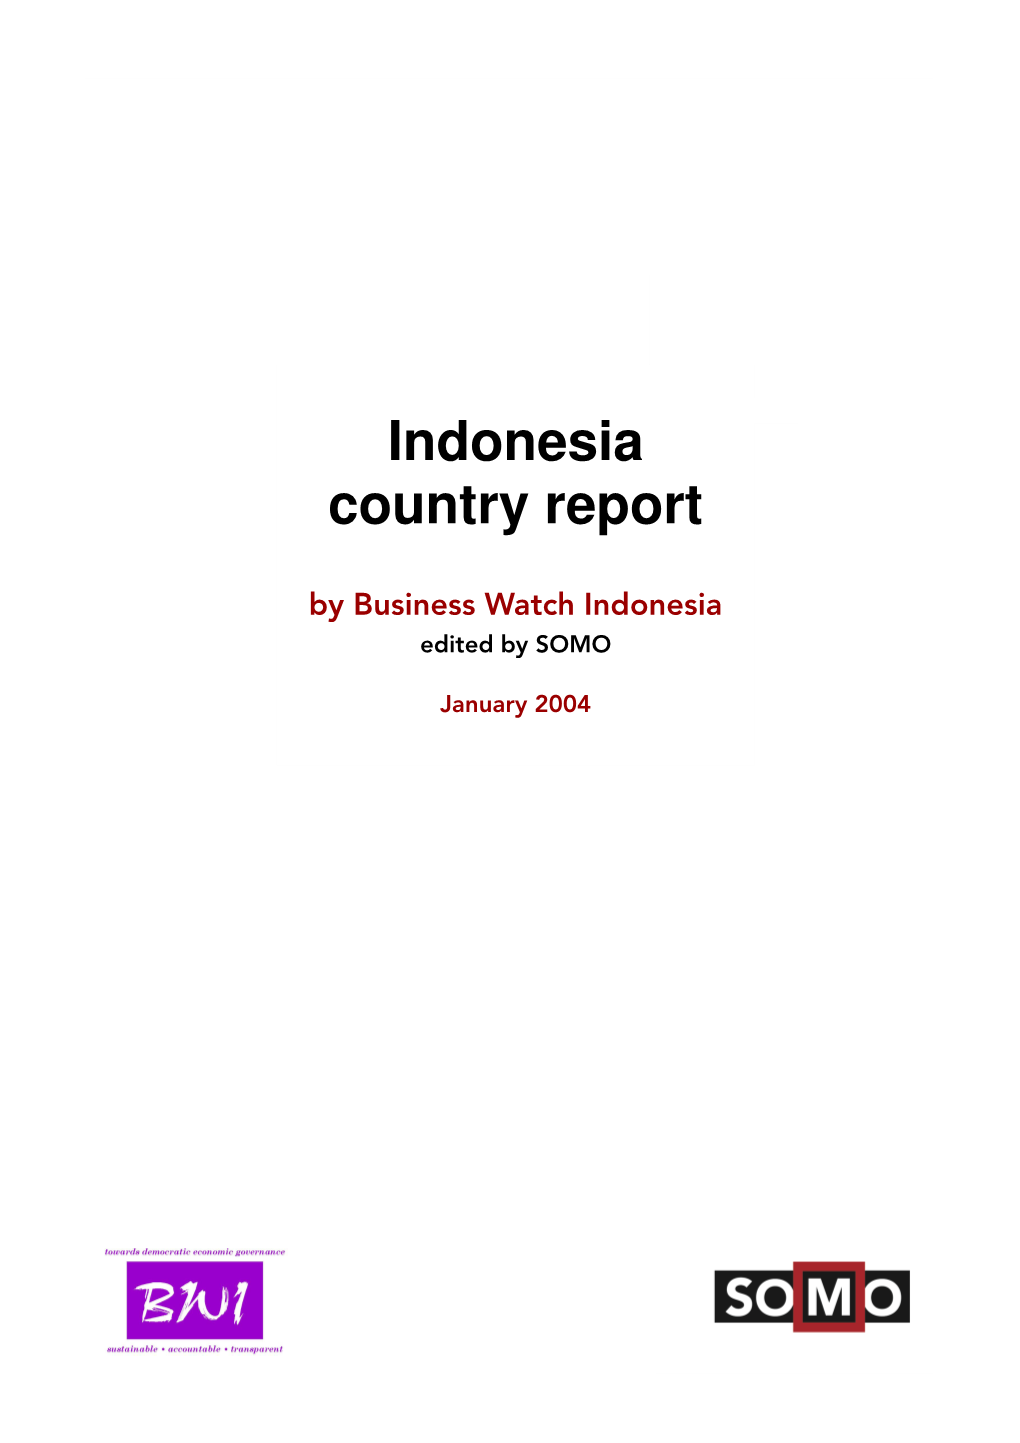 Indonesia Country Report